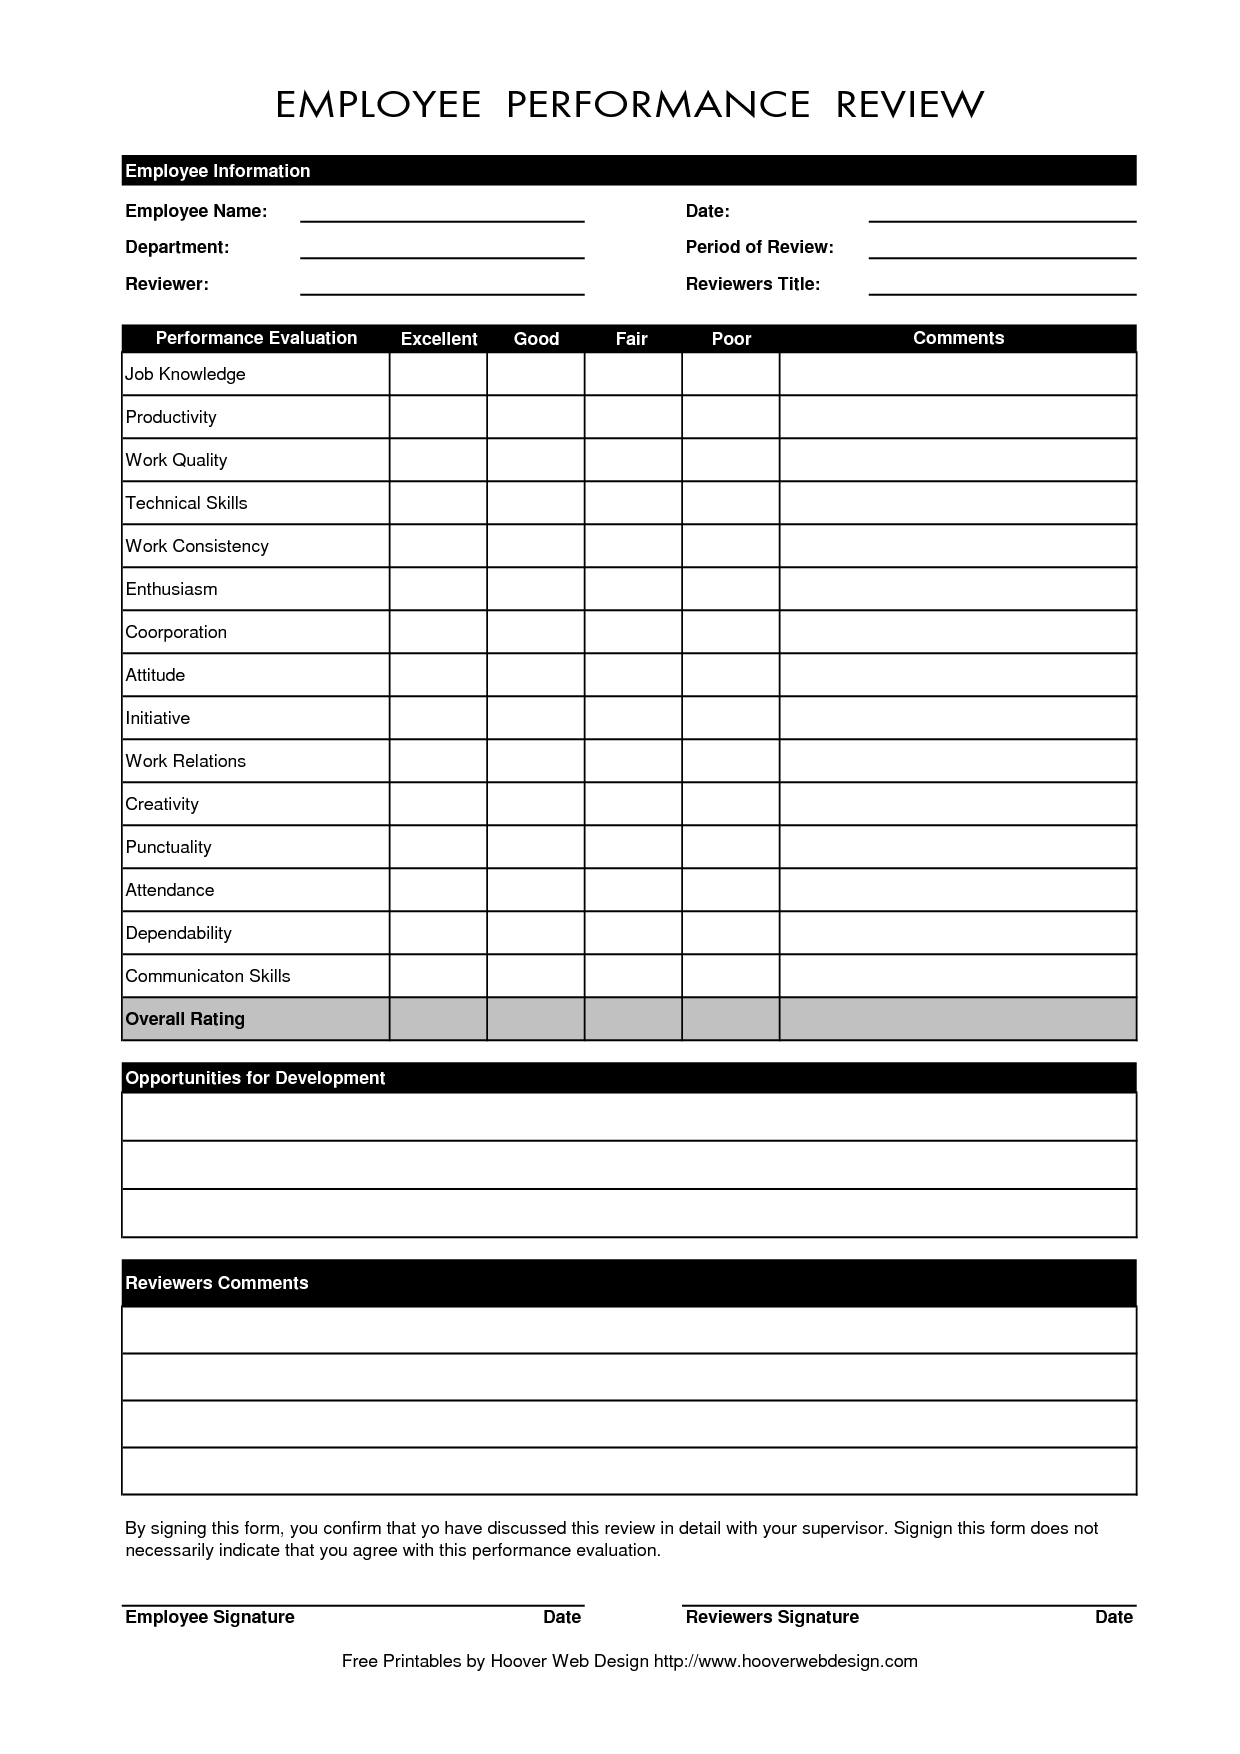 employee-evaluation-form-employee-evaluation-template